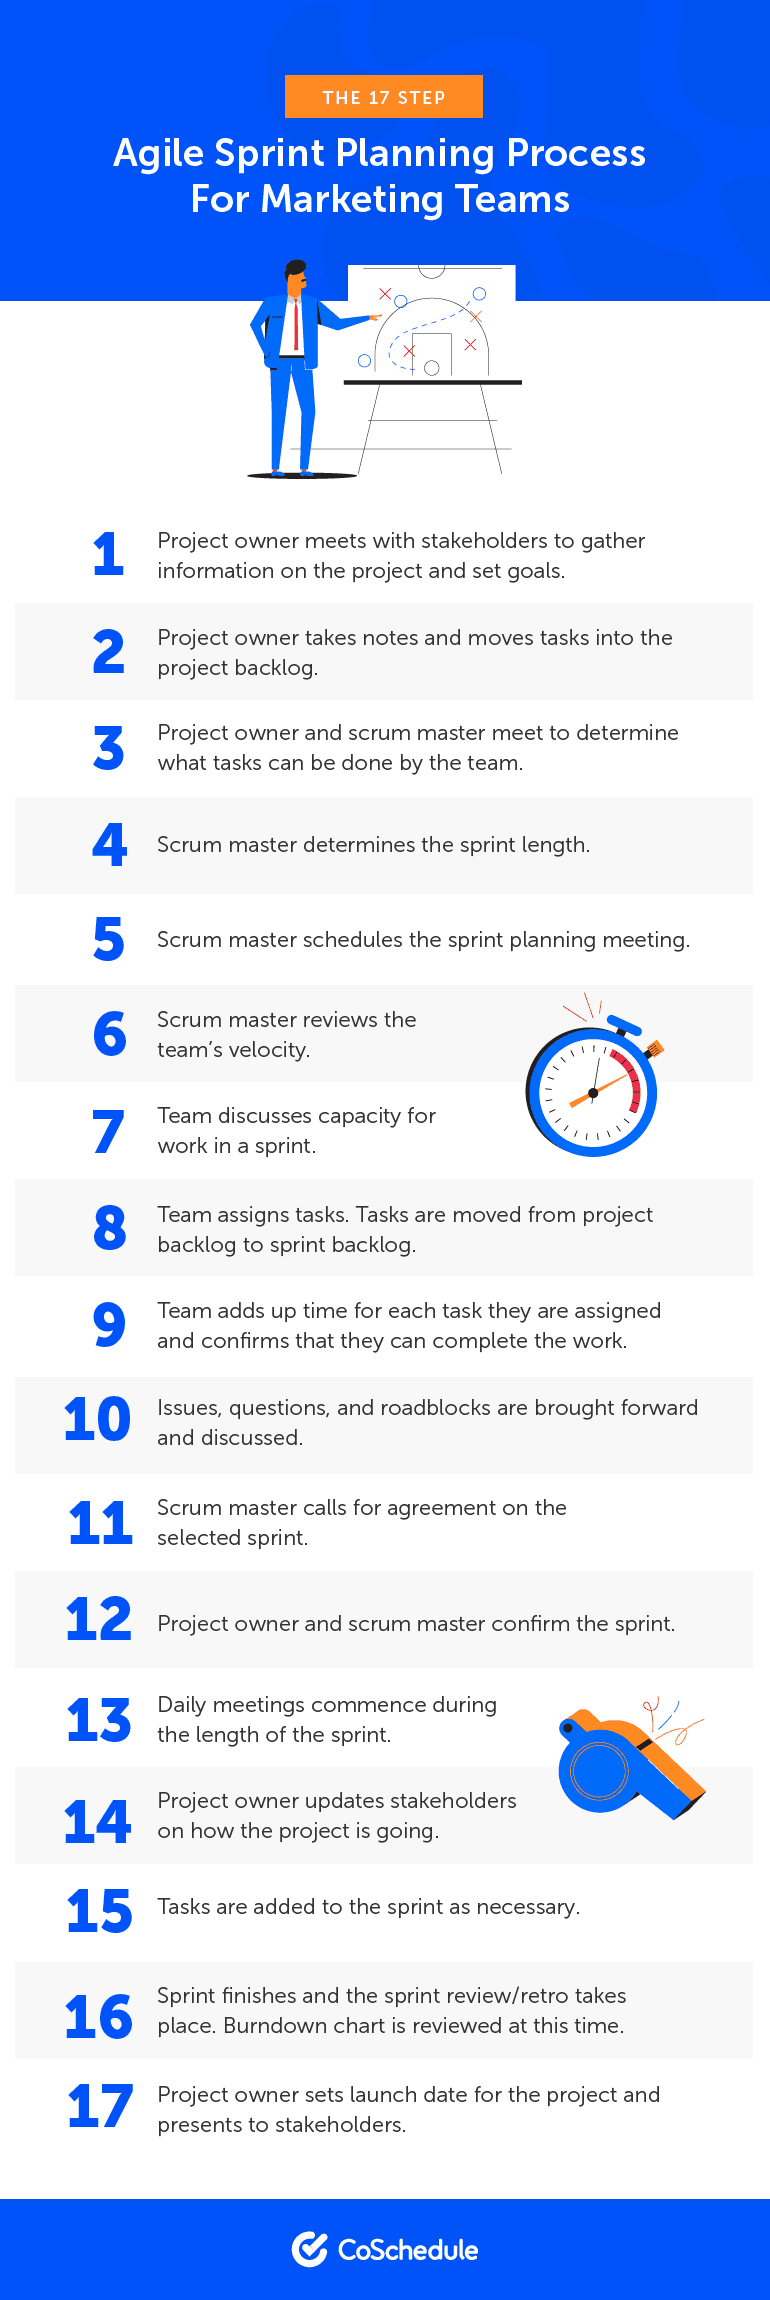 17 Steps of the Agile Sprint Planning